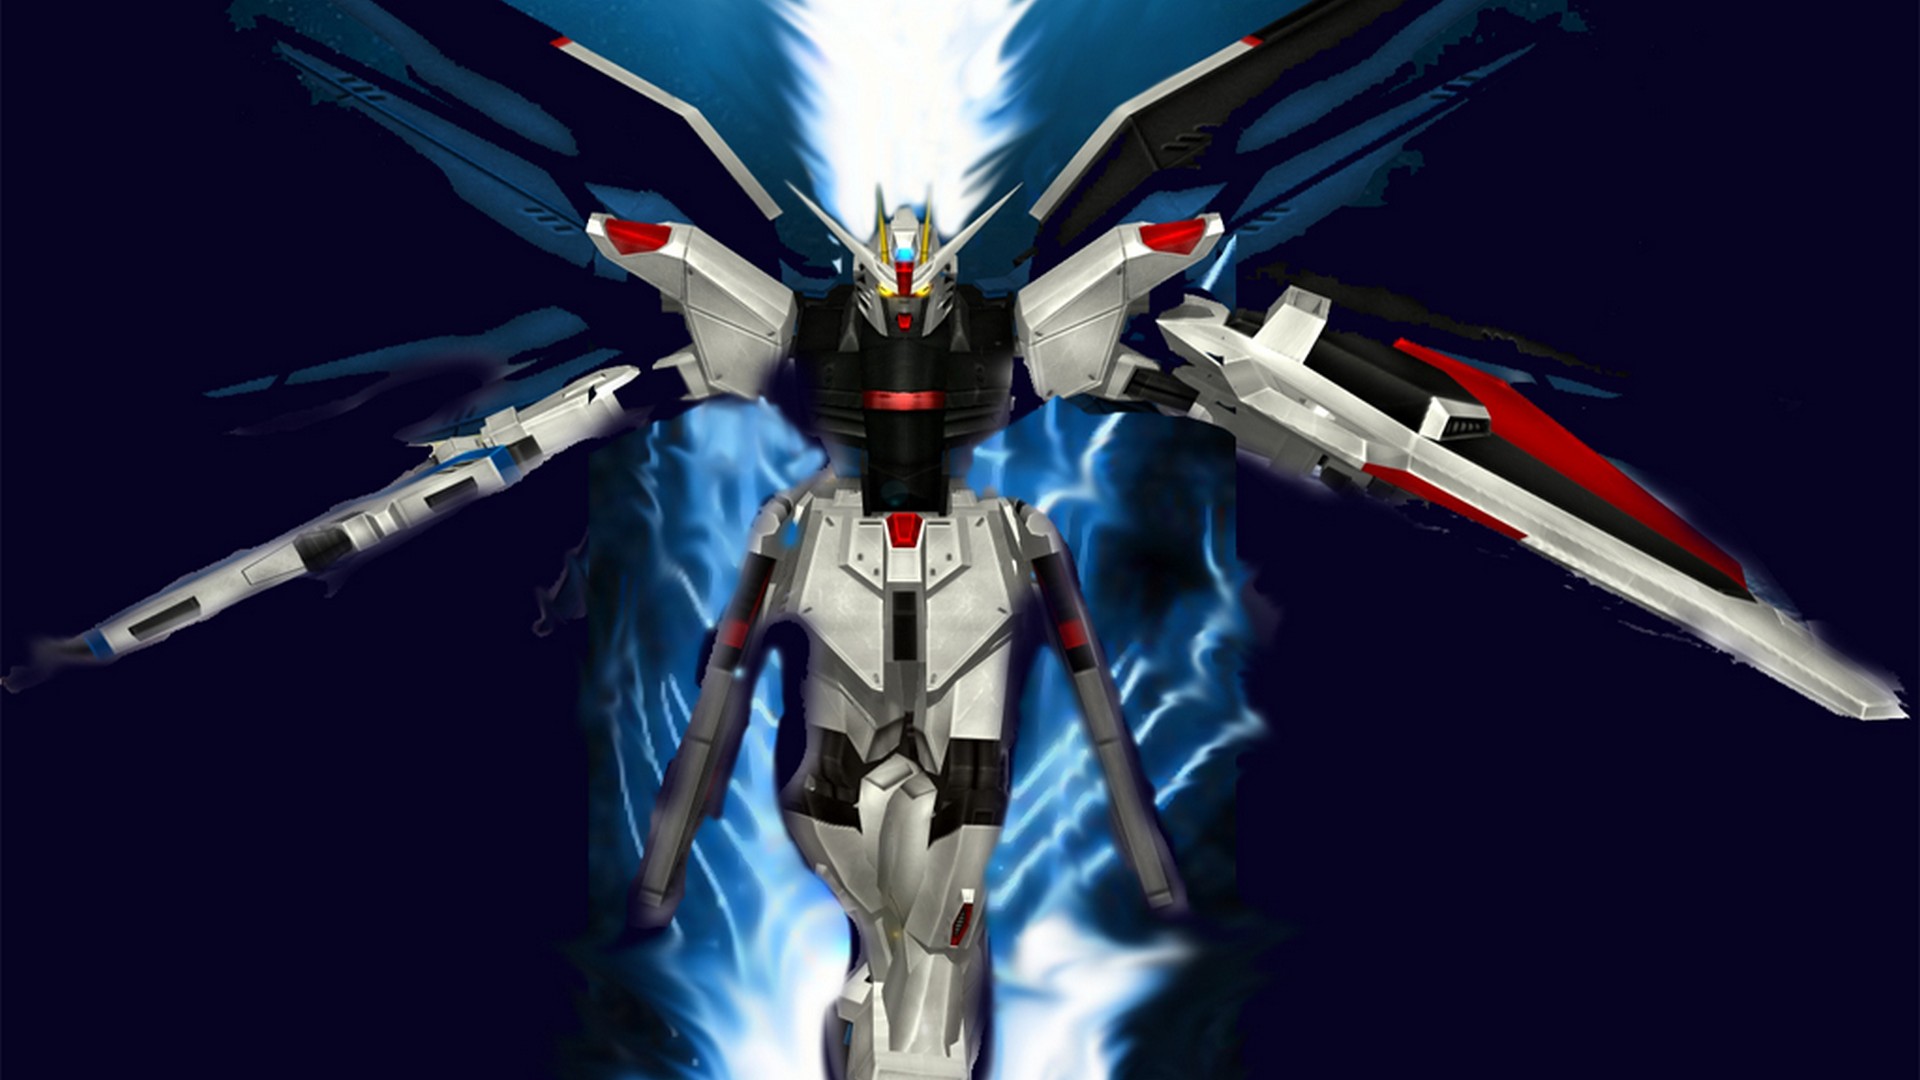 Wallpaper HD Gundam With high-resolution 1920X1080 pixel. You can use this wallpaper for your Desktop Computer Backgrounds, Mac Wallpapers, Android Lock screen or iPhone Screensavers and another smartphone device